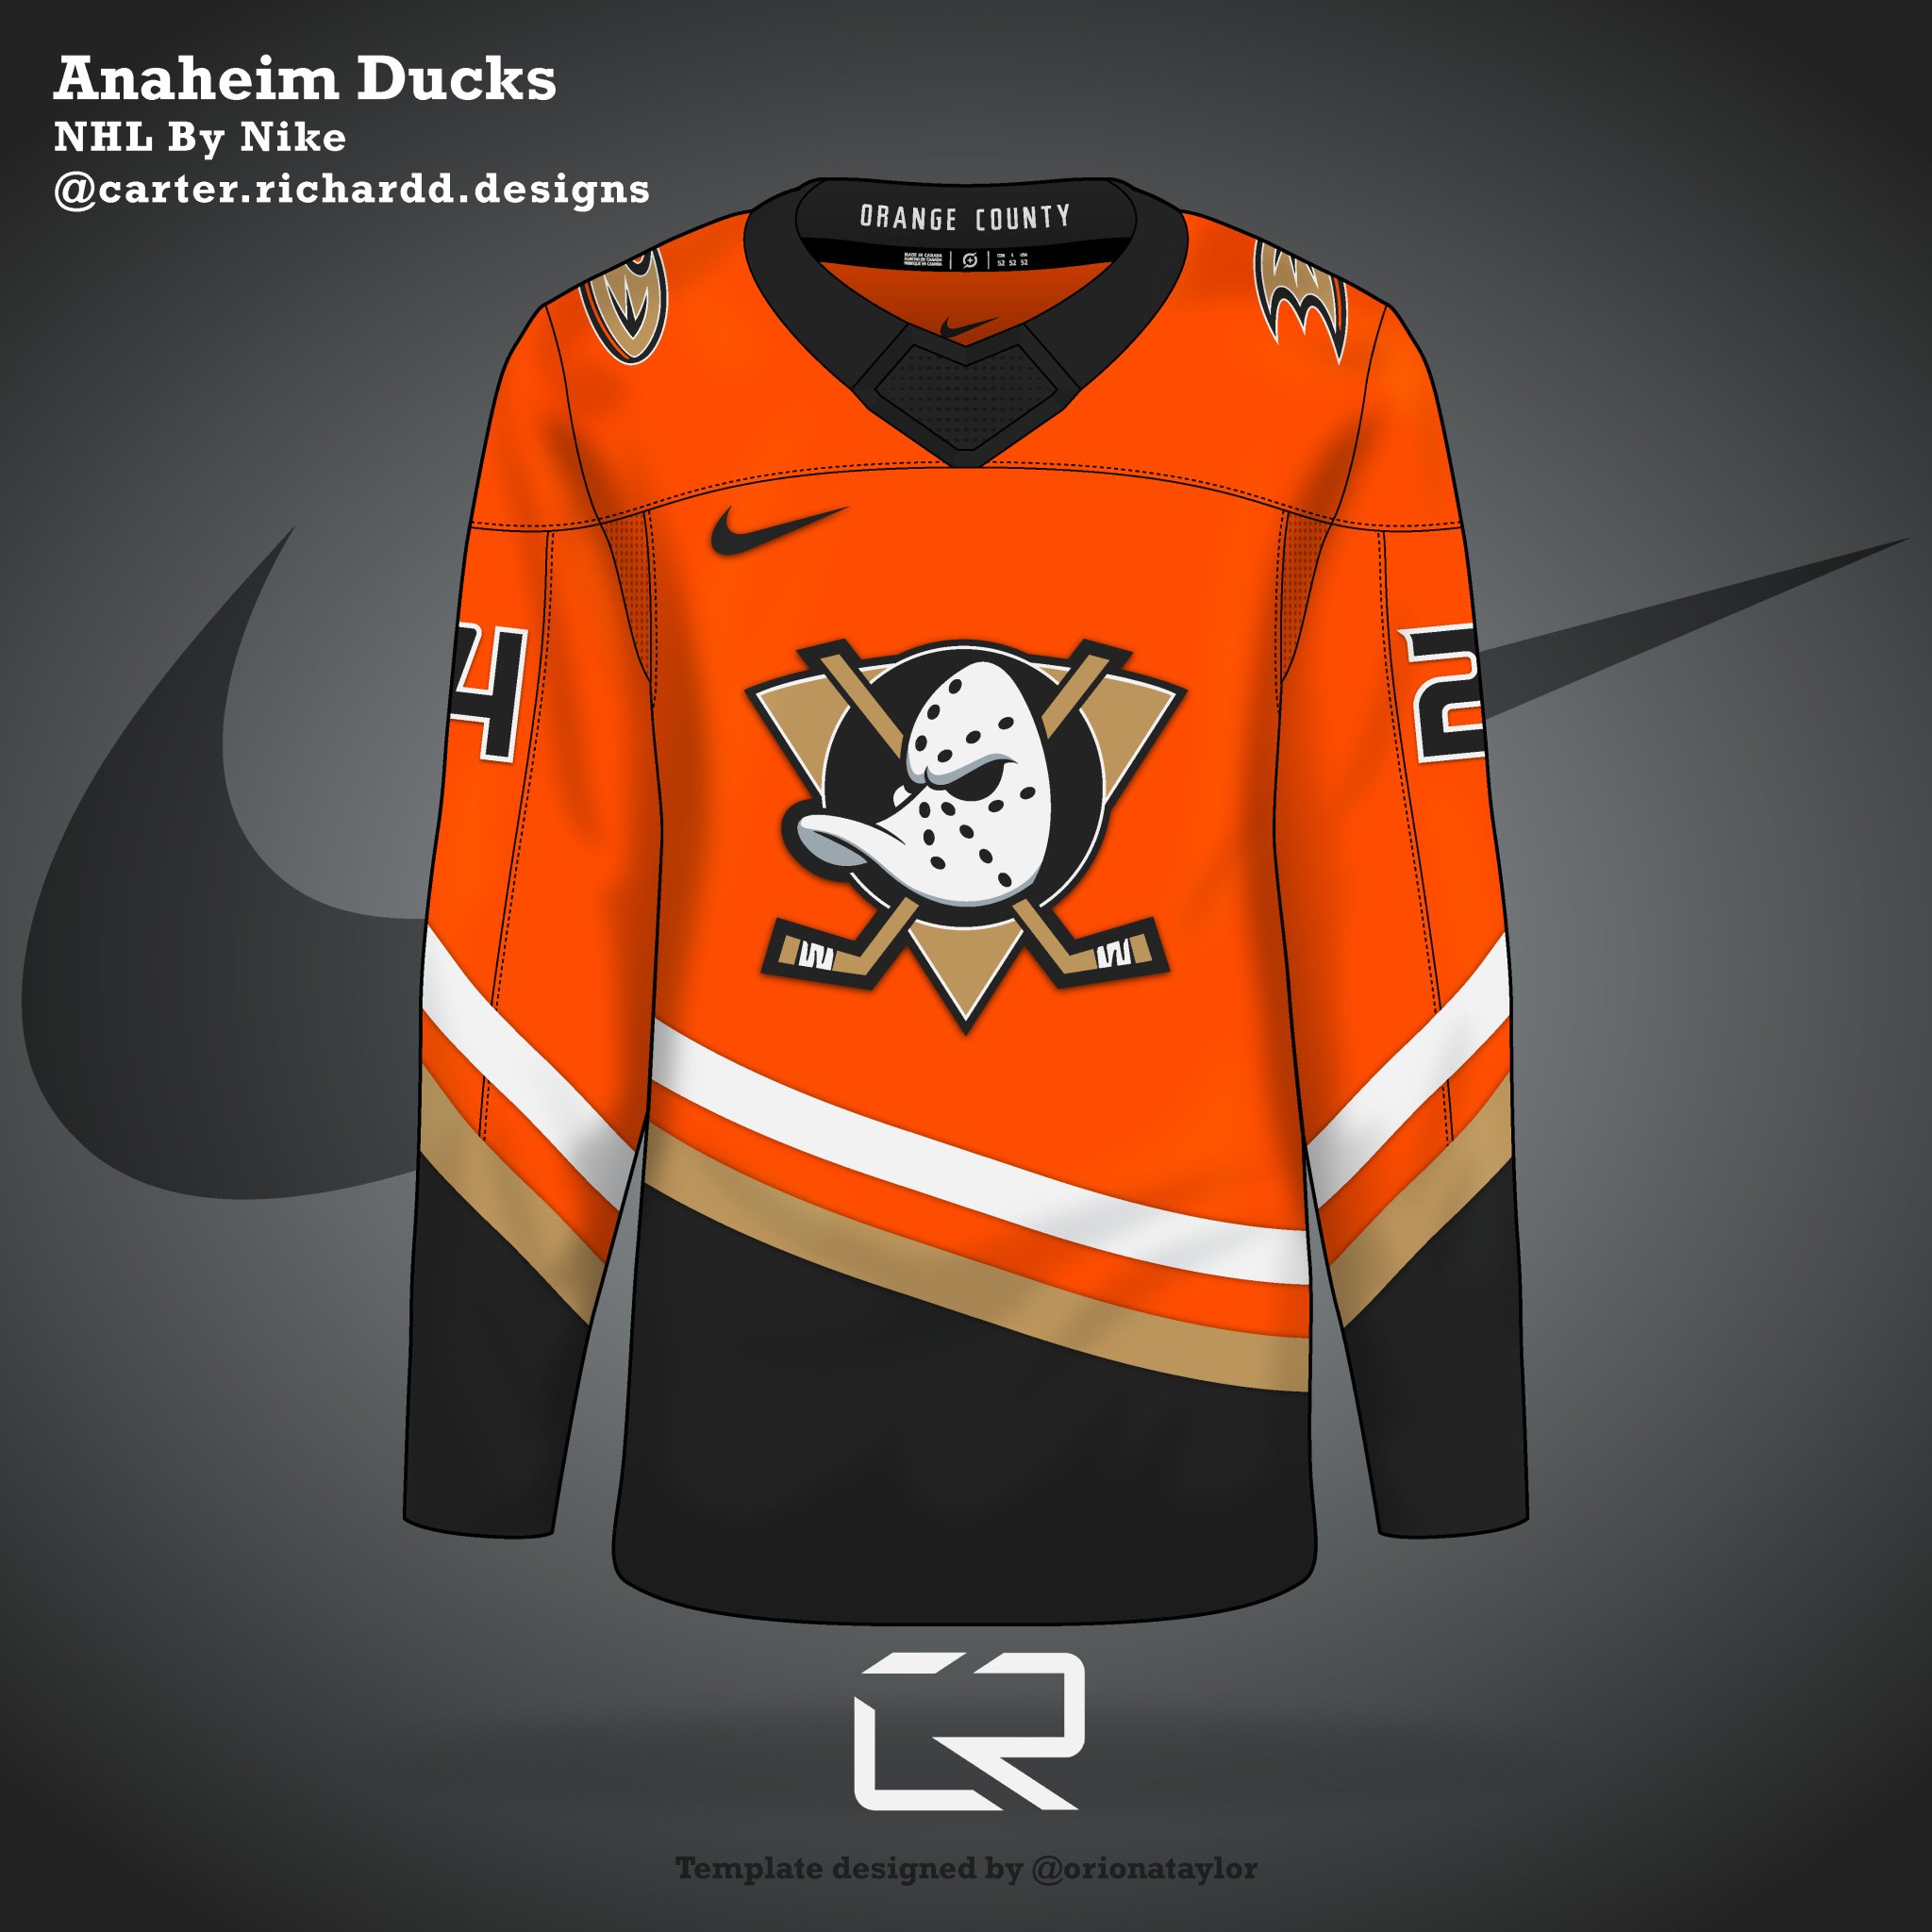 carter richard on Twitter: "NHL Nike series is officially underway! Per usual, Twitter will get to see the jerseys before Instagram :) - @AnaheimDucks #FlyTogether get a redesigned set, working